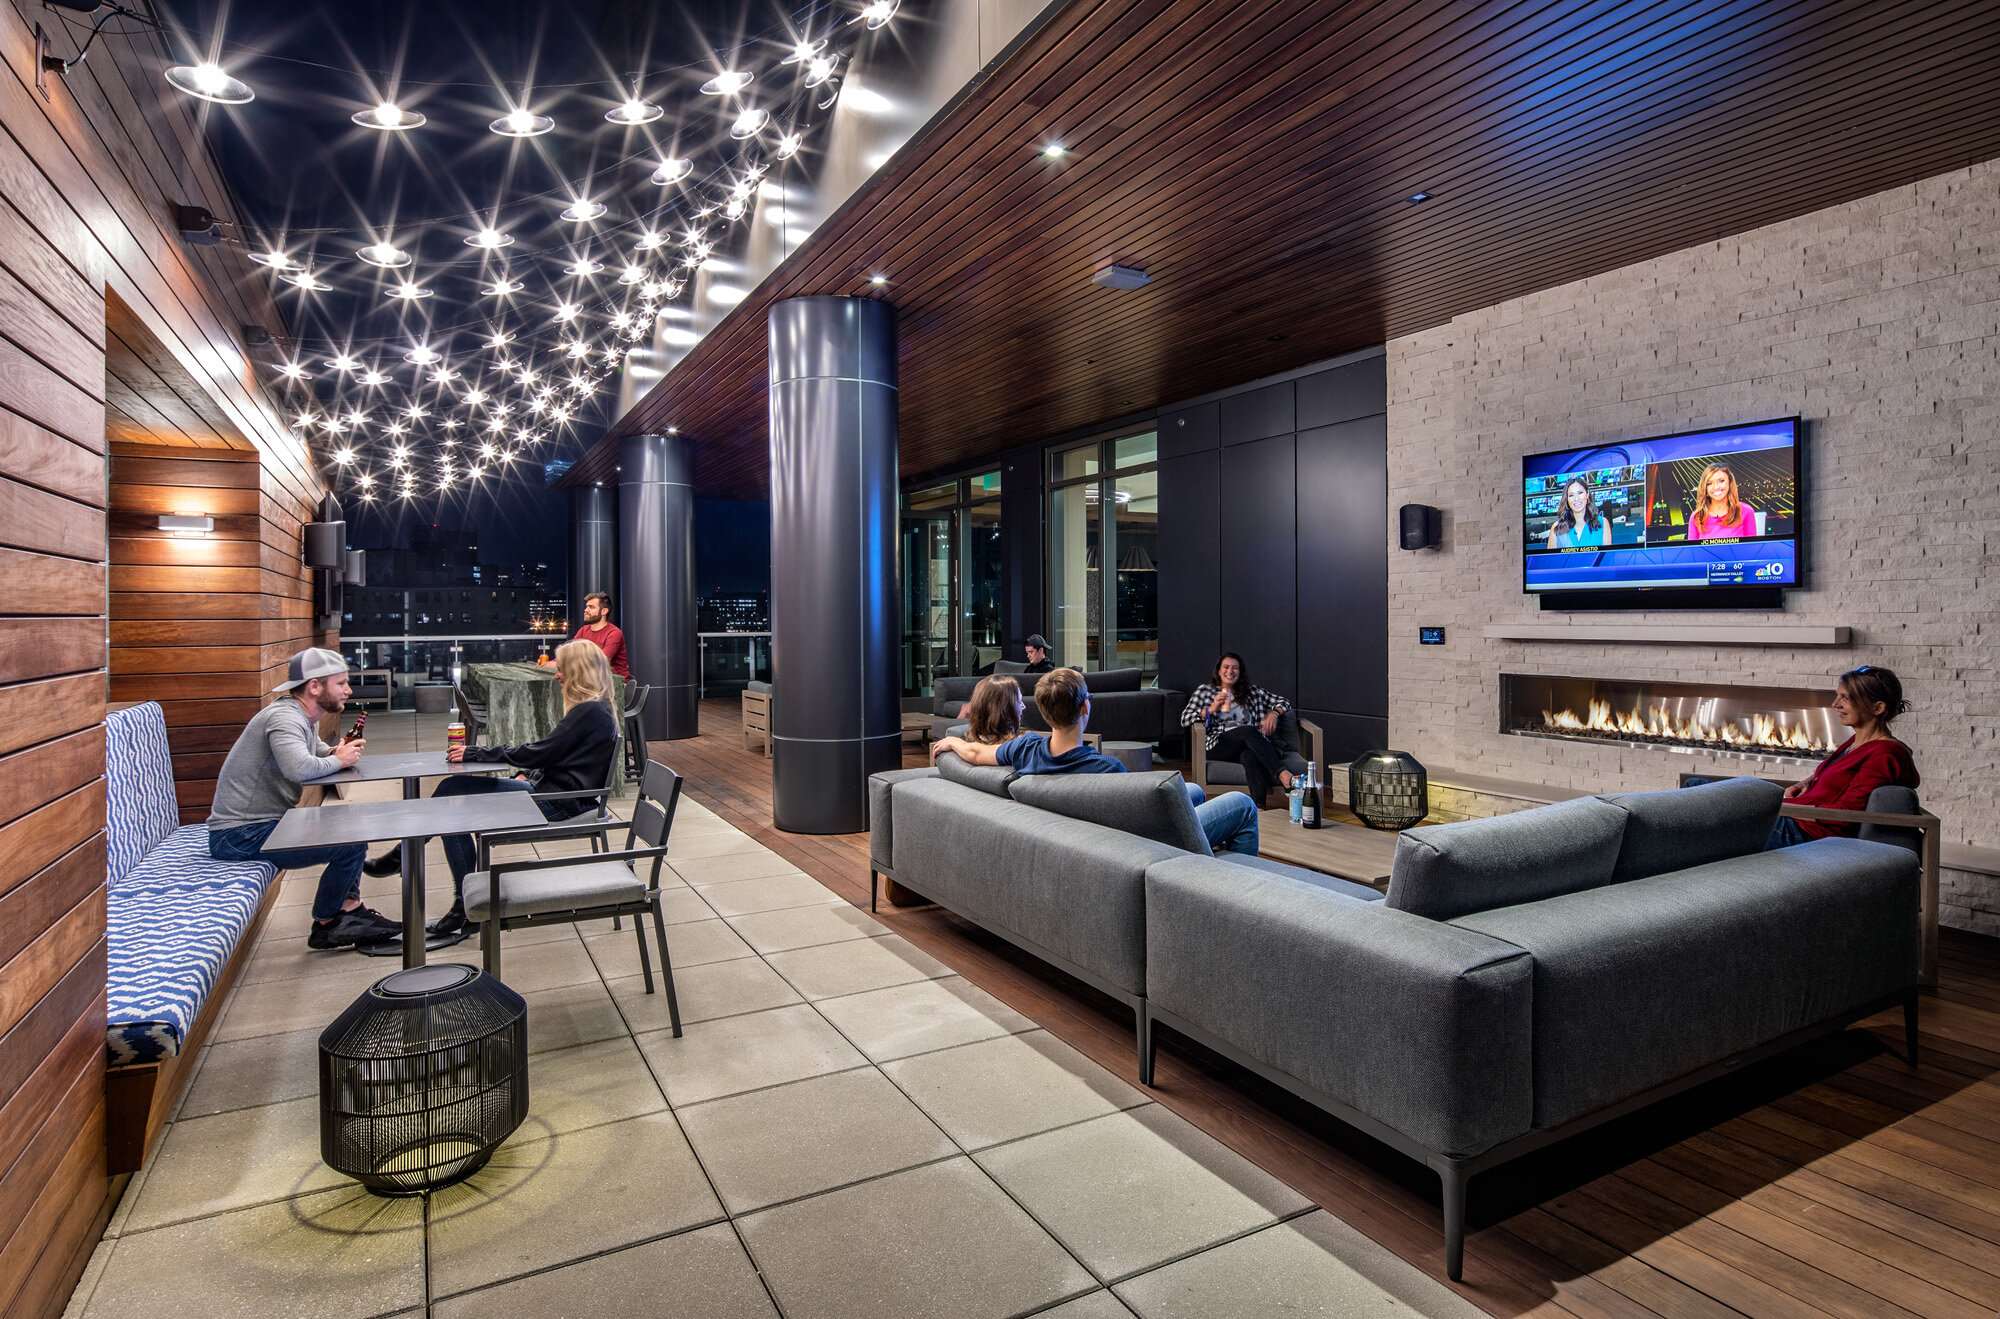  Variety of seating options on The Smith amenity deck (photo by Ed Wonsek) 